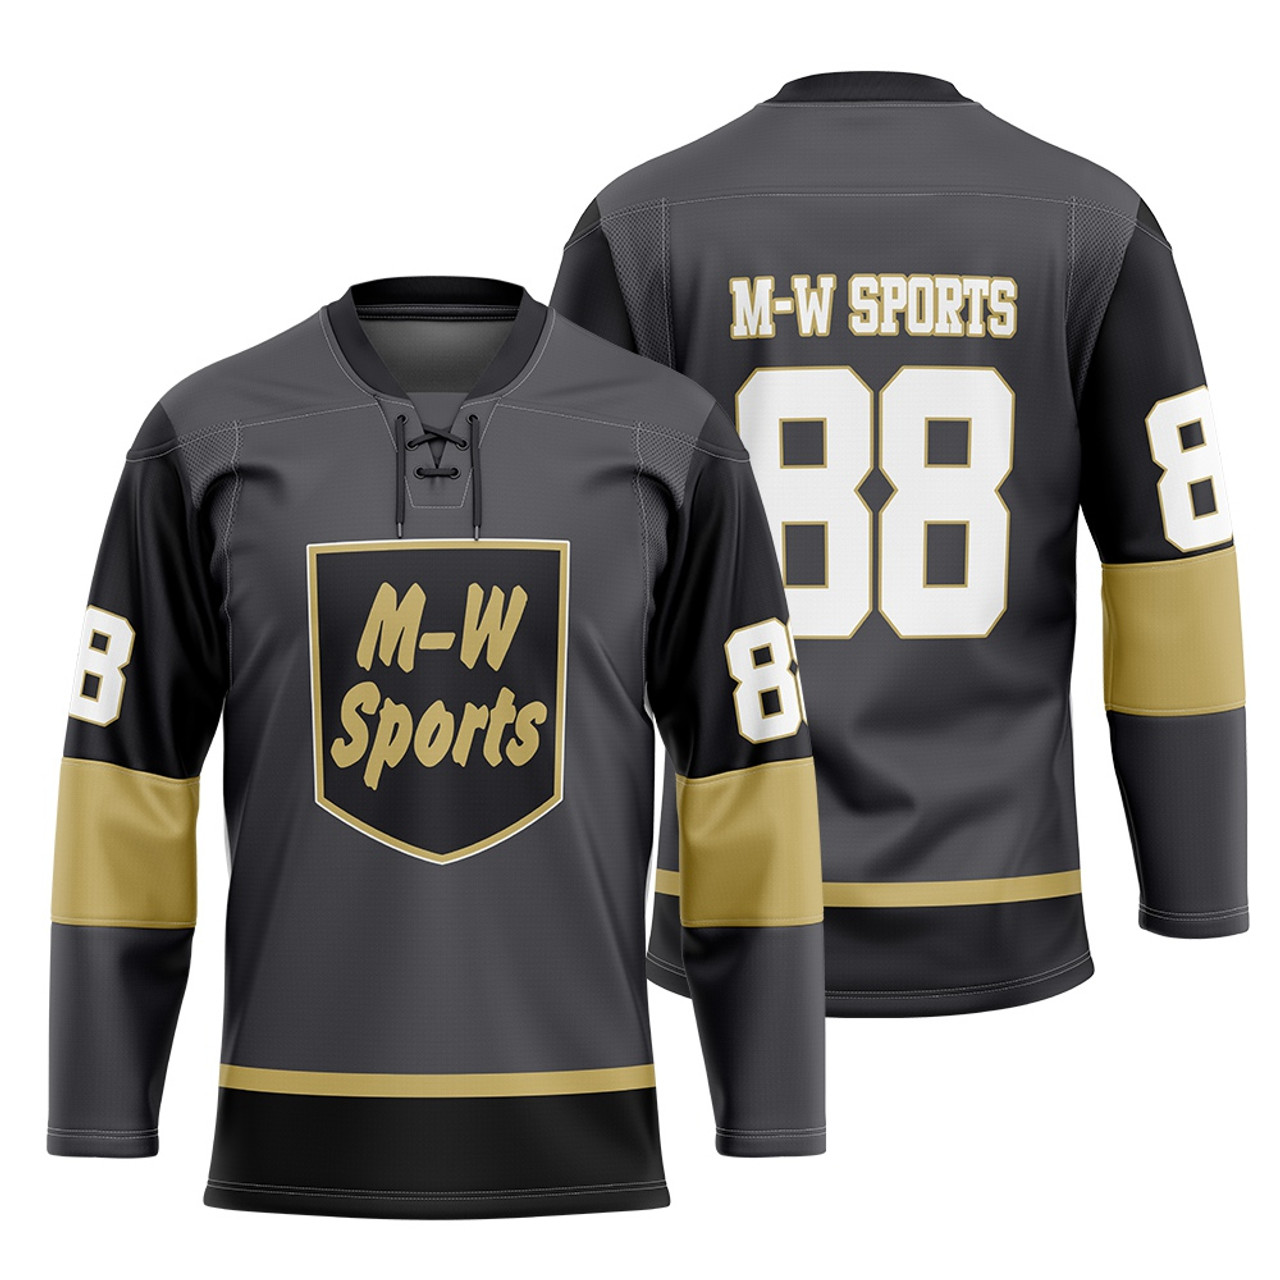 Custom made sublimation print ice hockey jersey for your own team